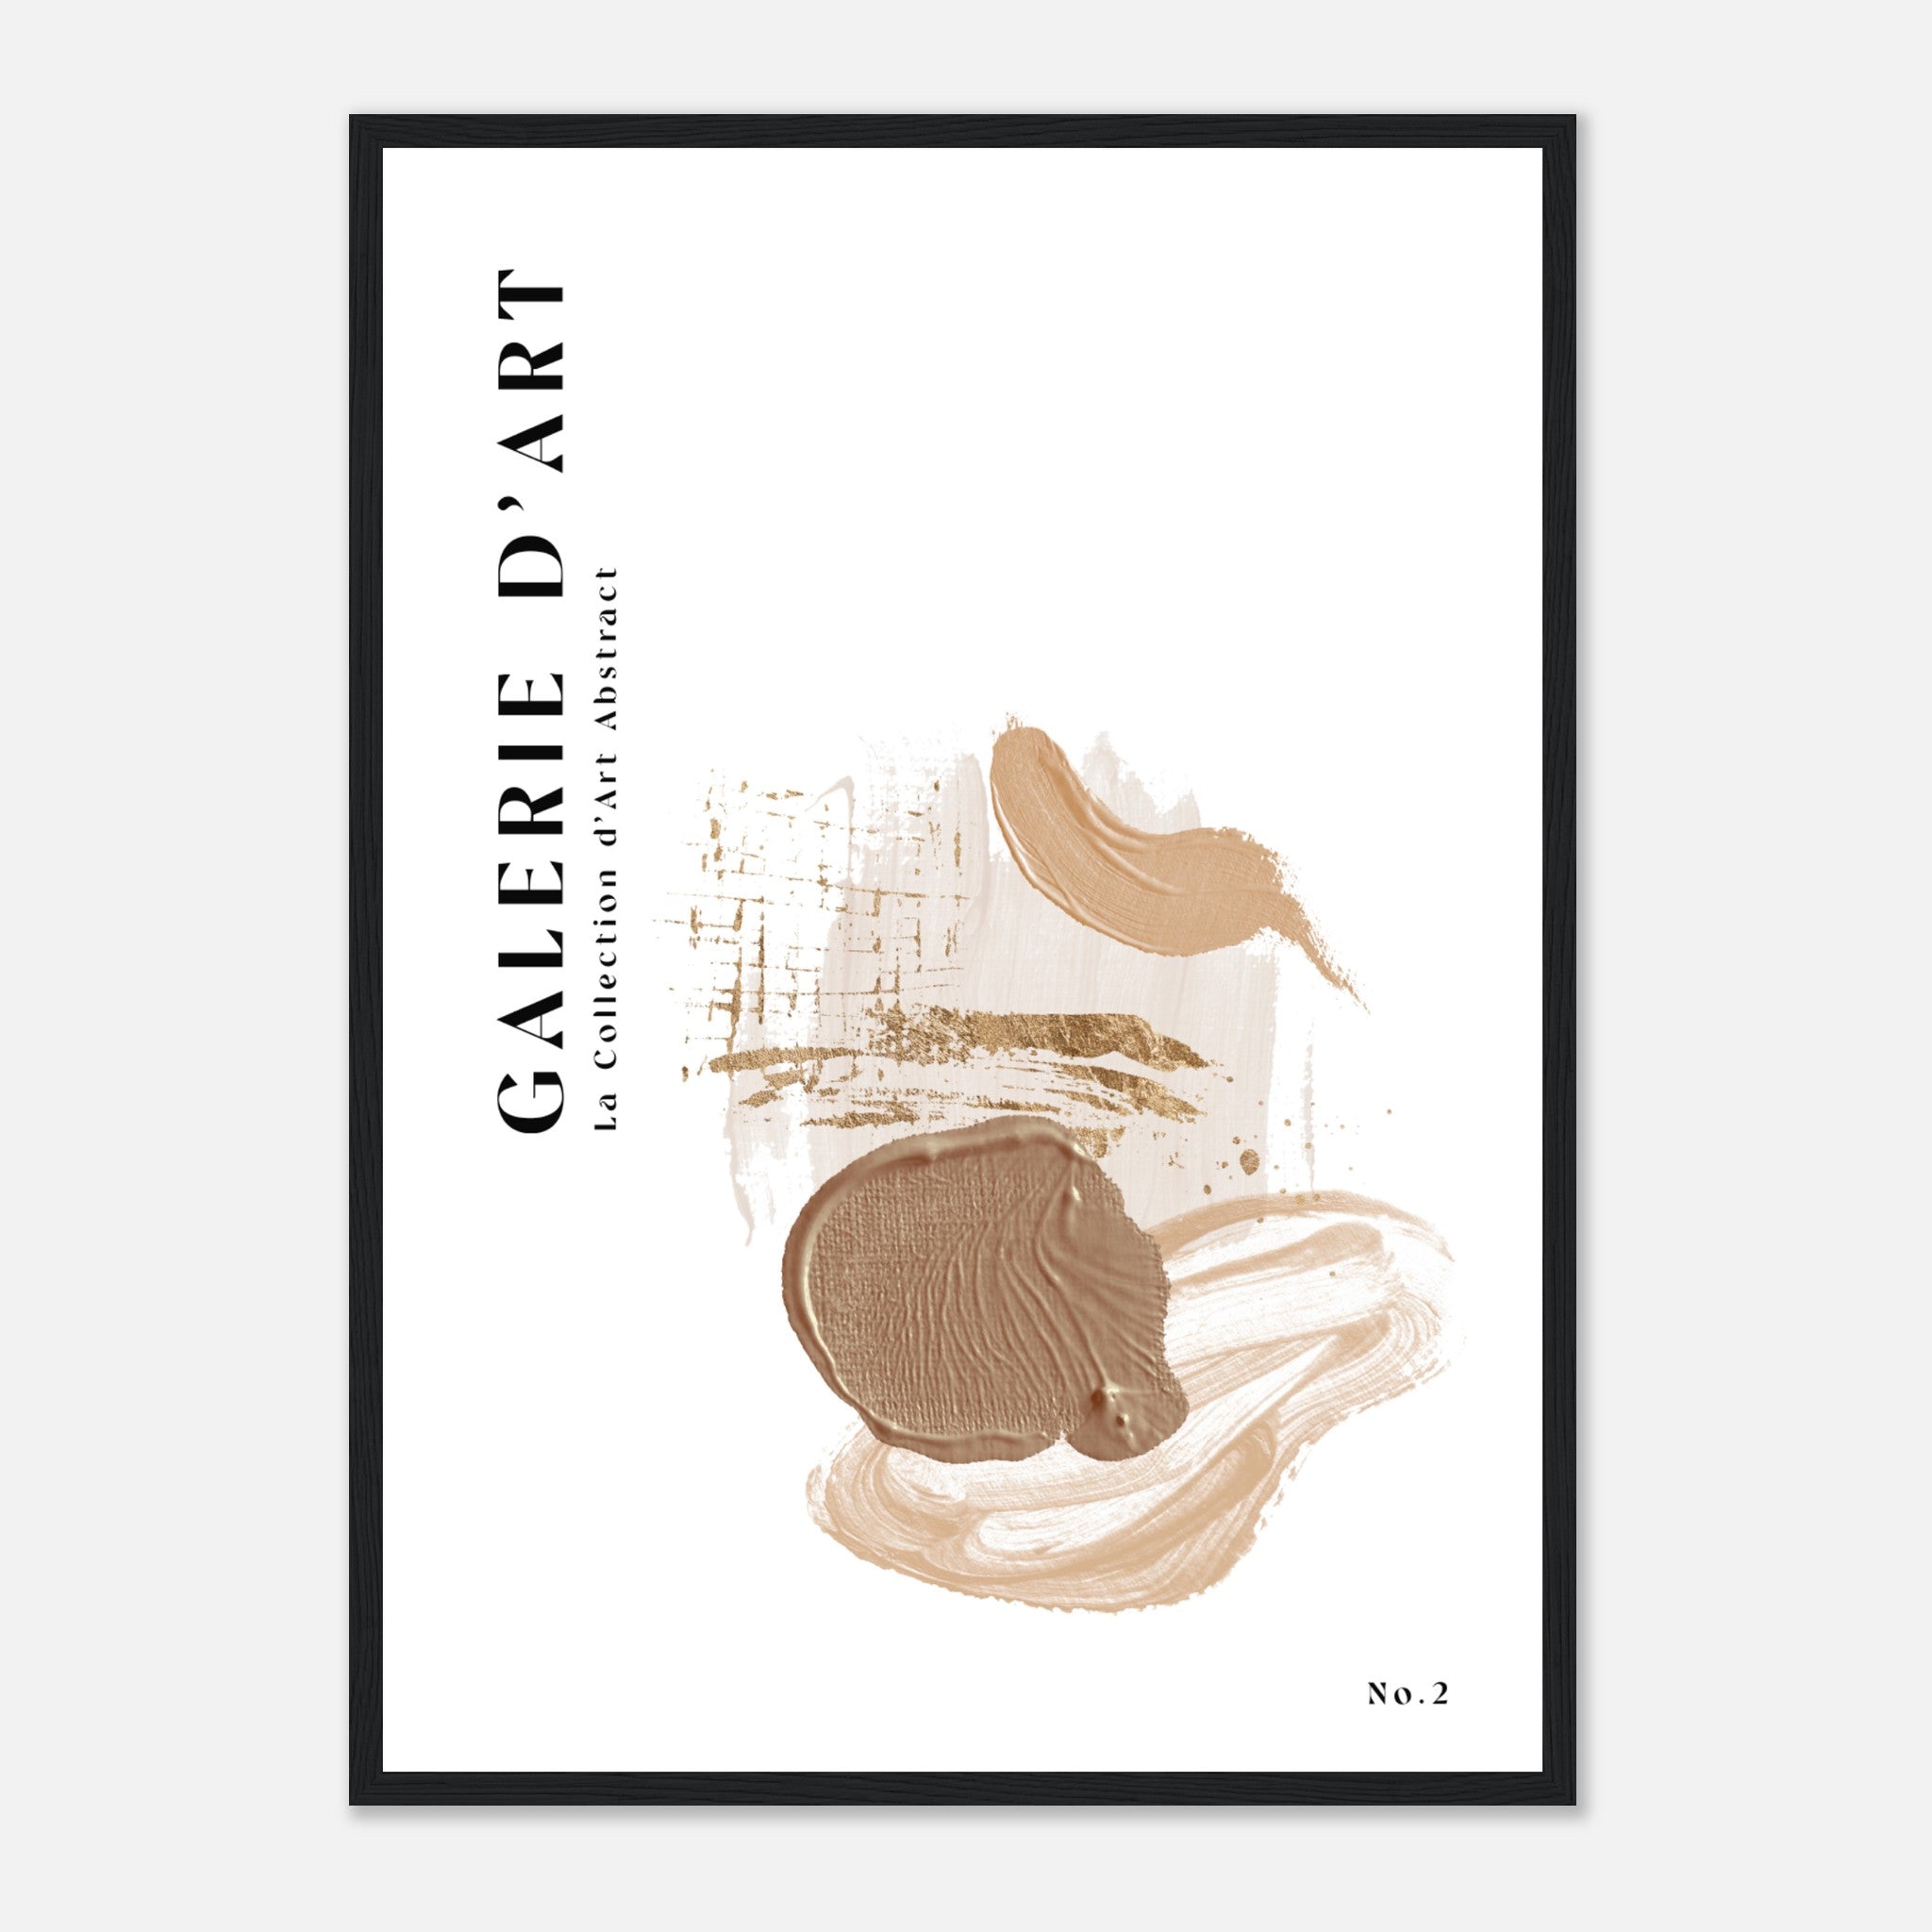 Galerie Art Abstract No. 2 Poster